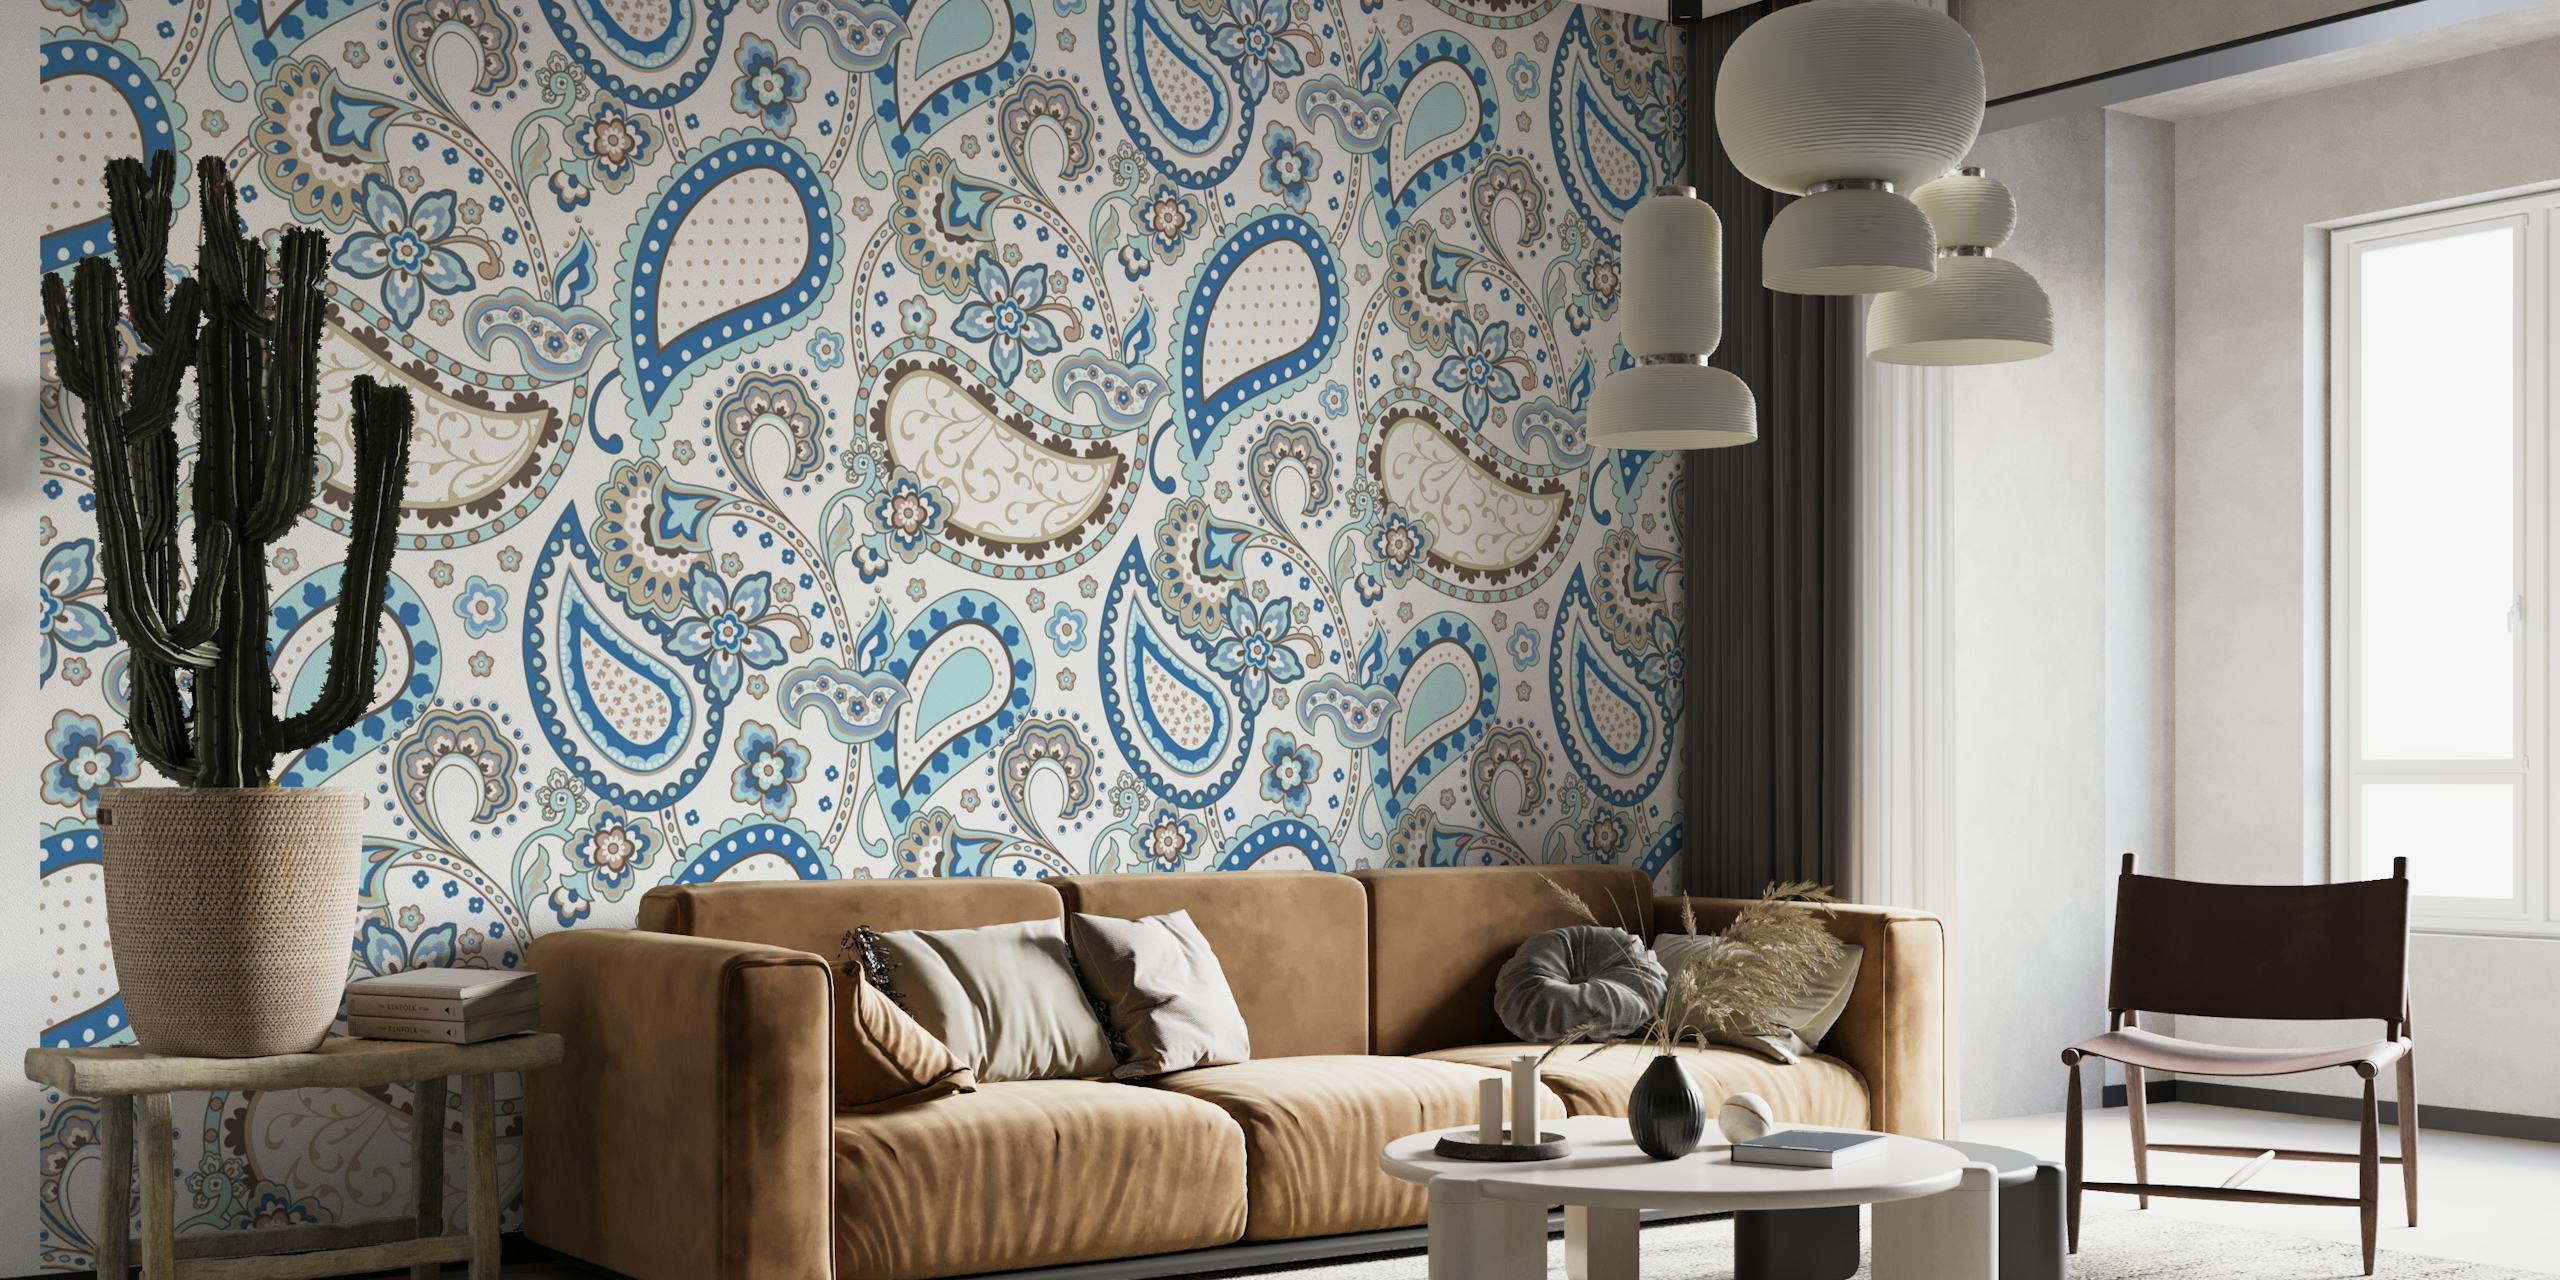 Paisley pattern wall mural in blue, brown, and white